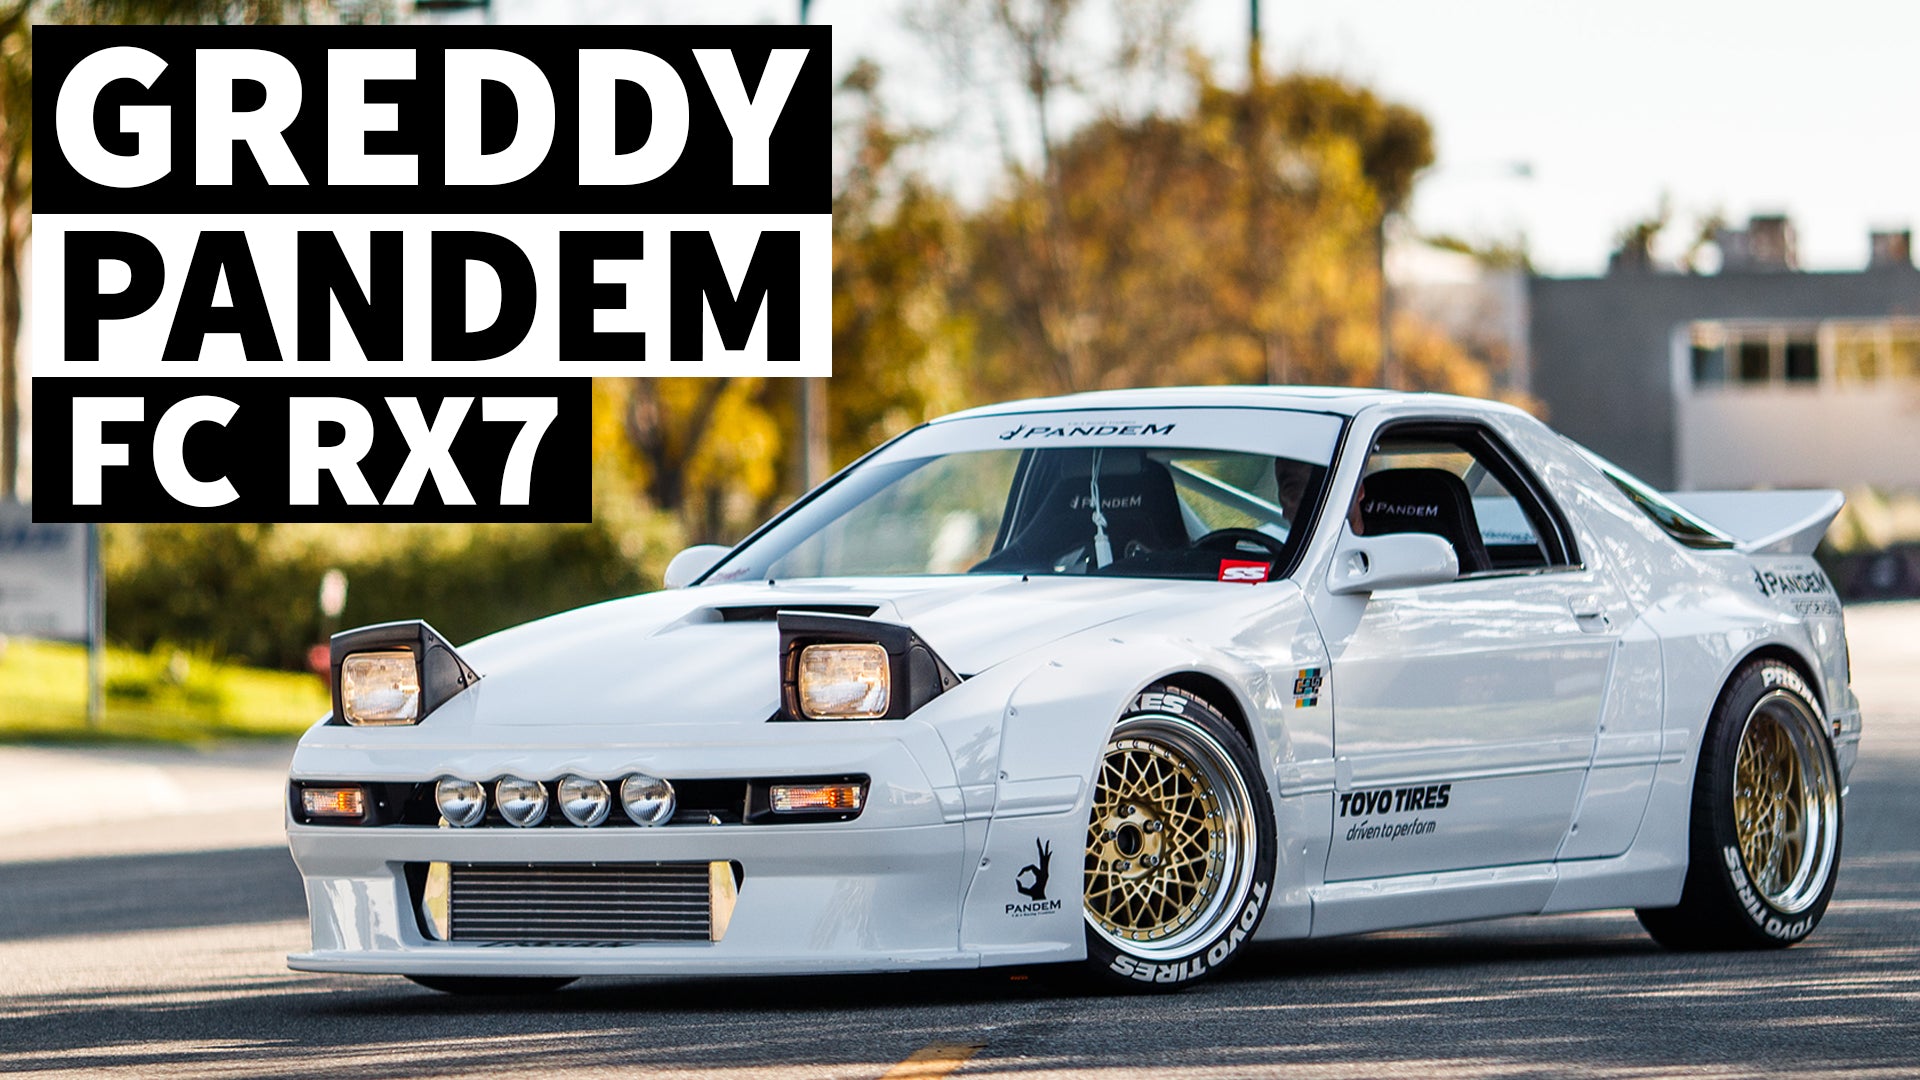 The Best Fc Rx 7 Widebody Kit Ever The Pandem Greddy Rx 7 Is An